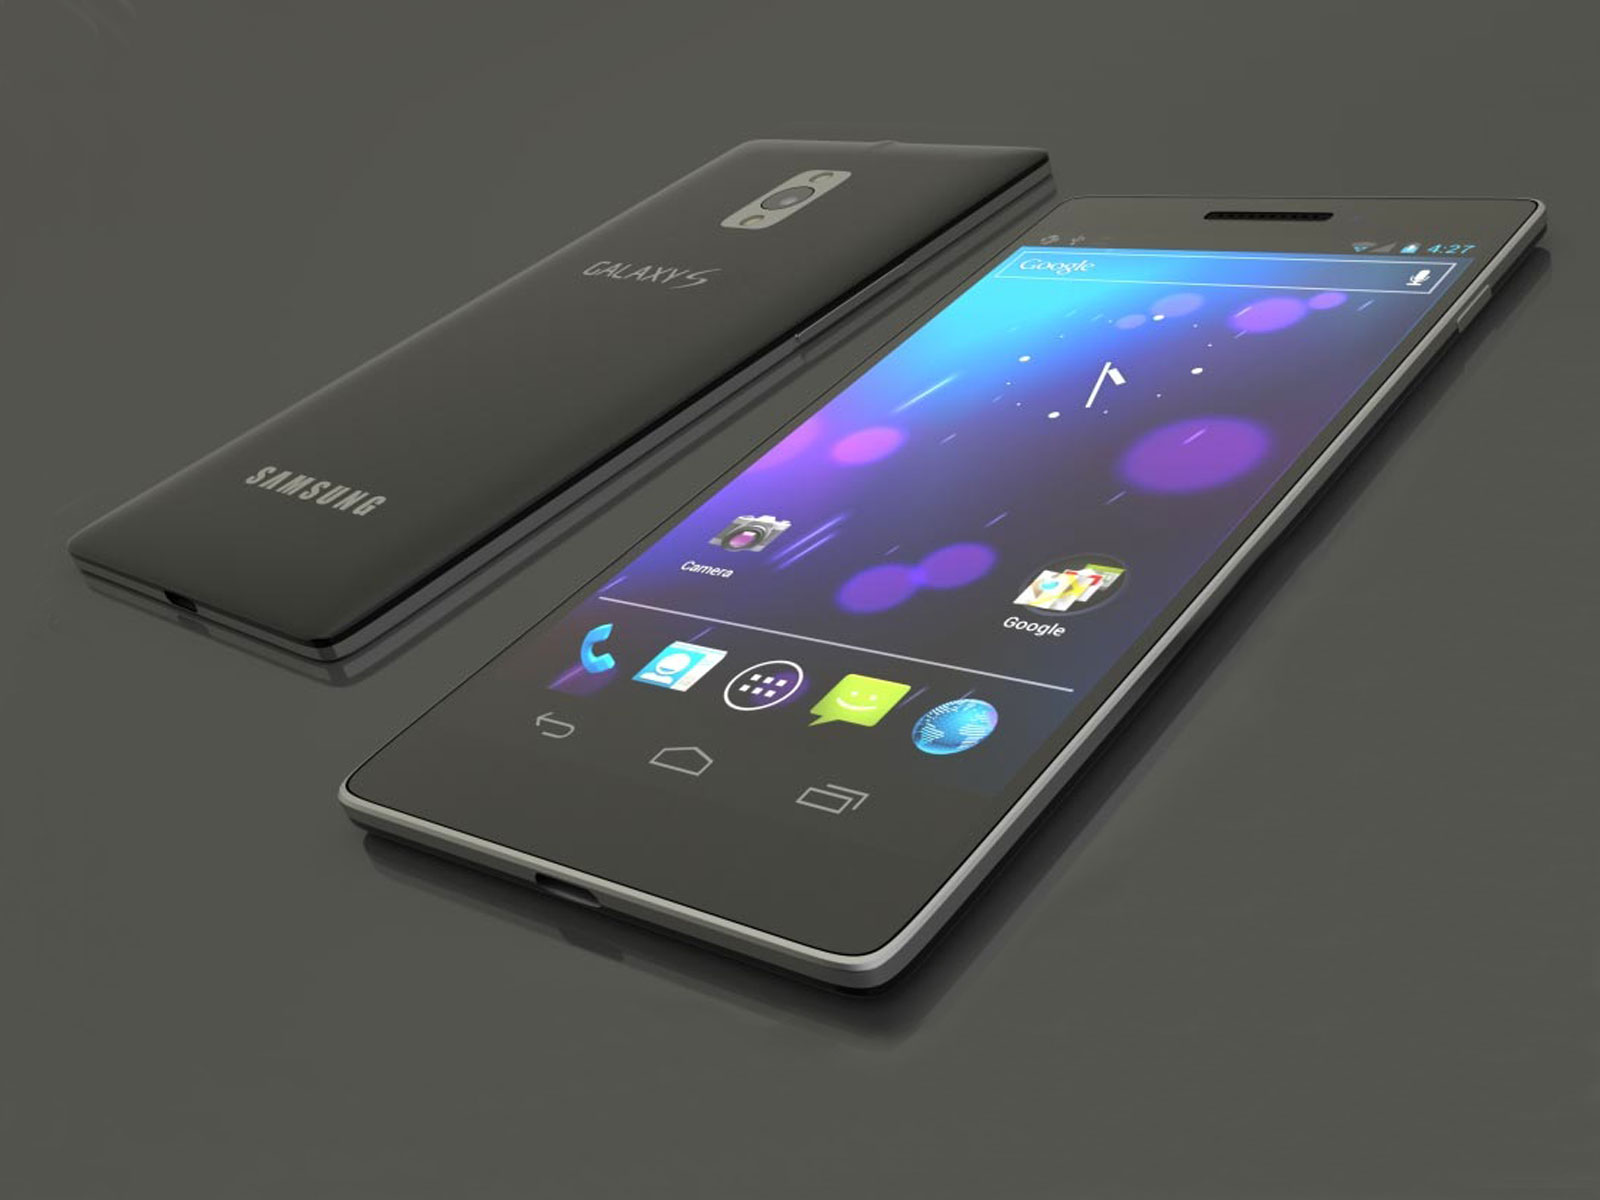 Samsung Galaxy S4 to Launch in a Few Weeks | SellCell.com Blog